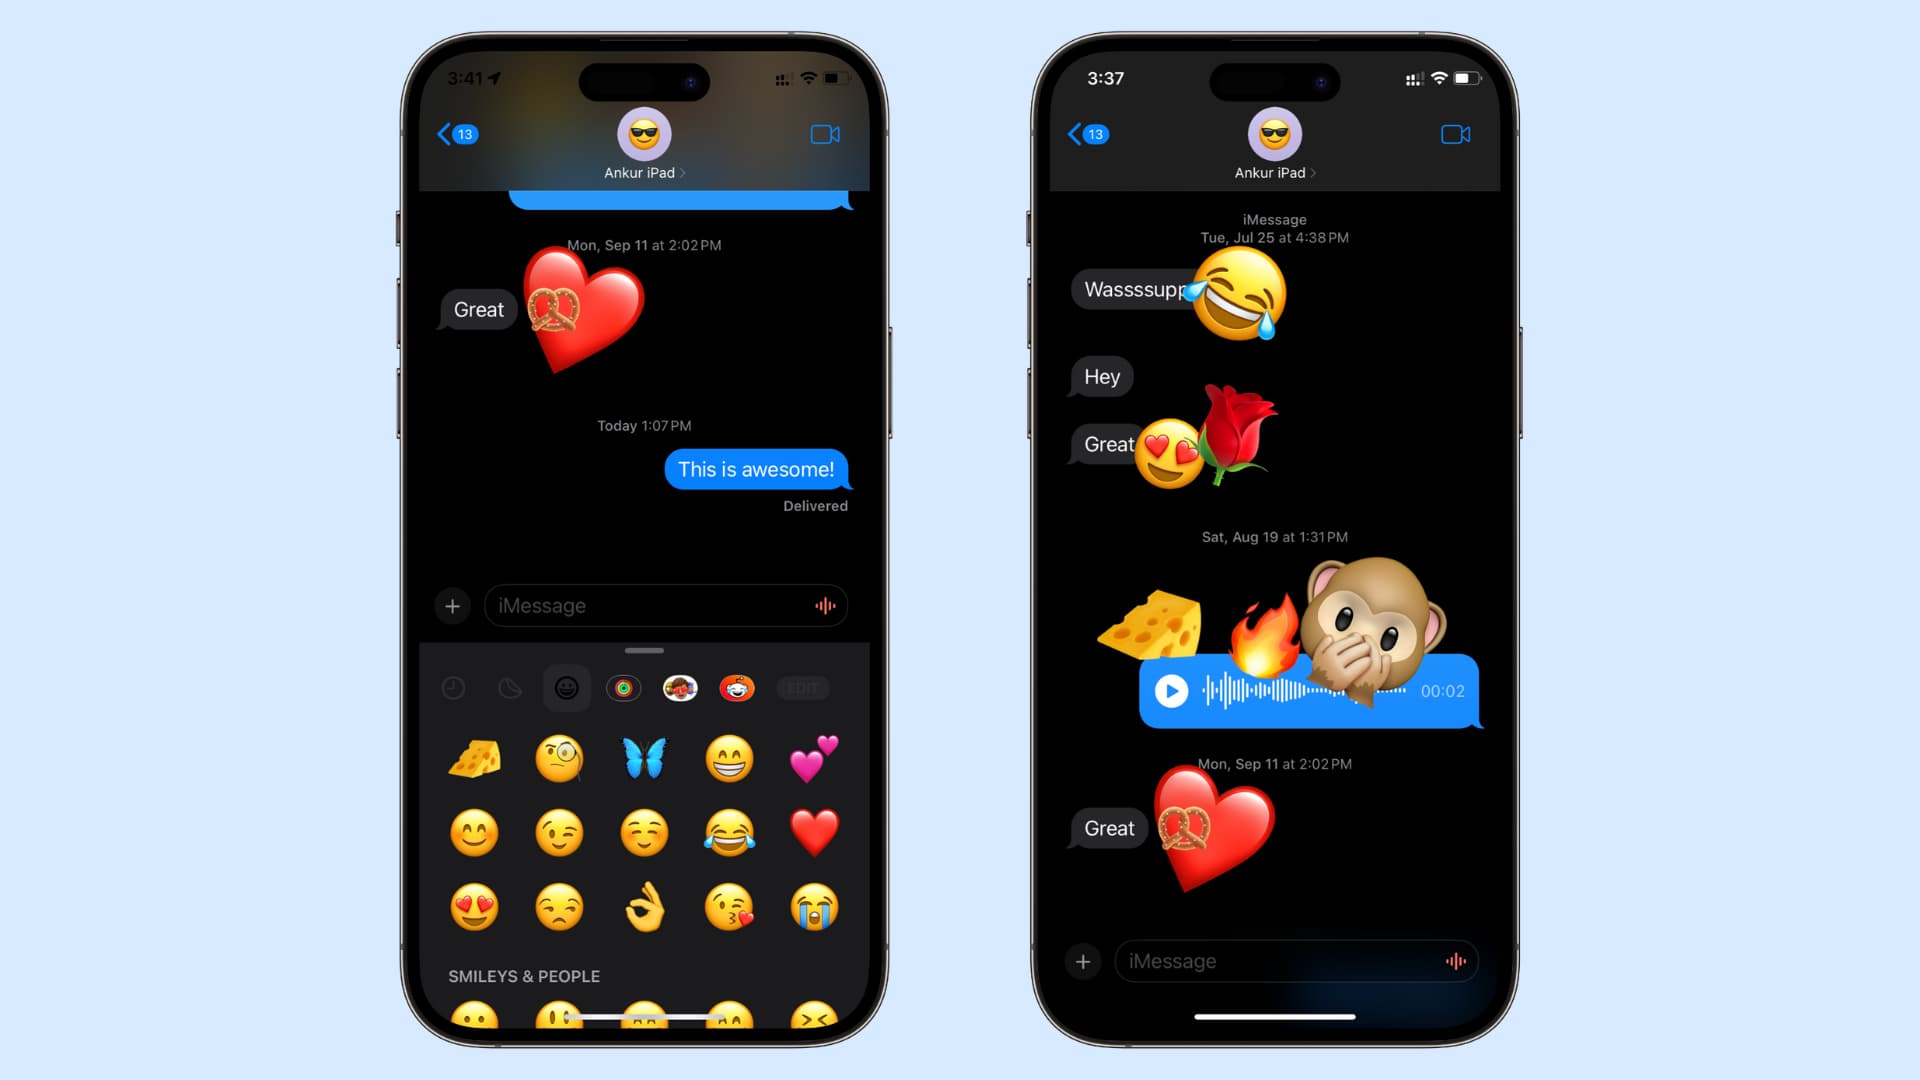 How to react to a message using an emoji on iPhone